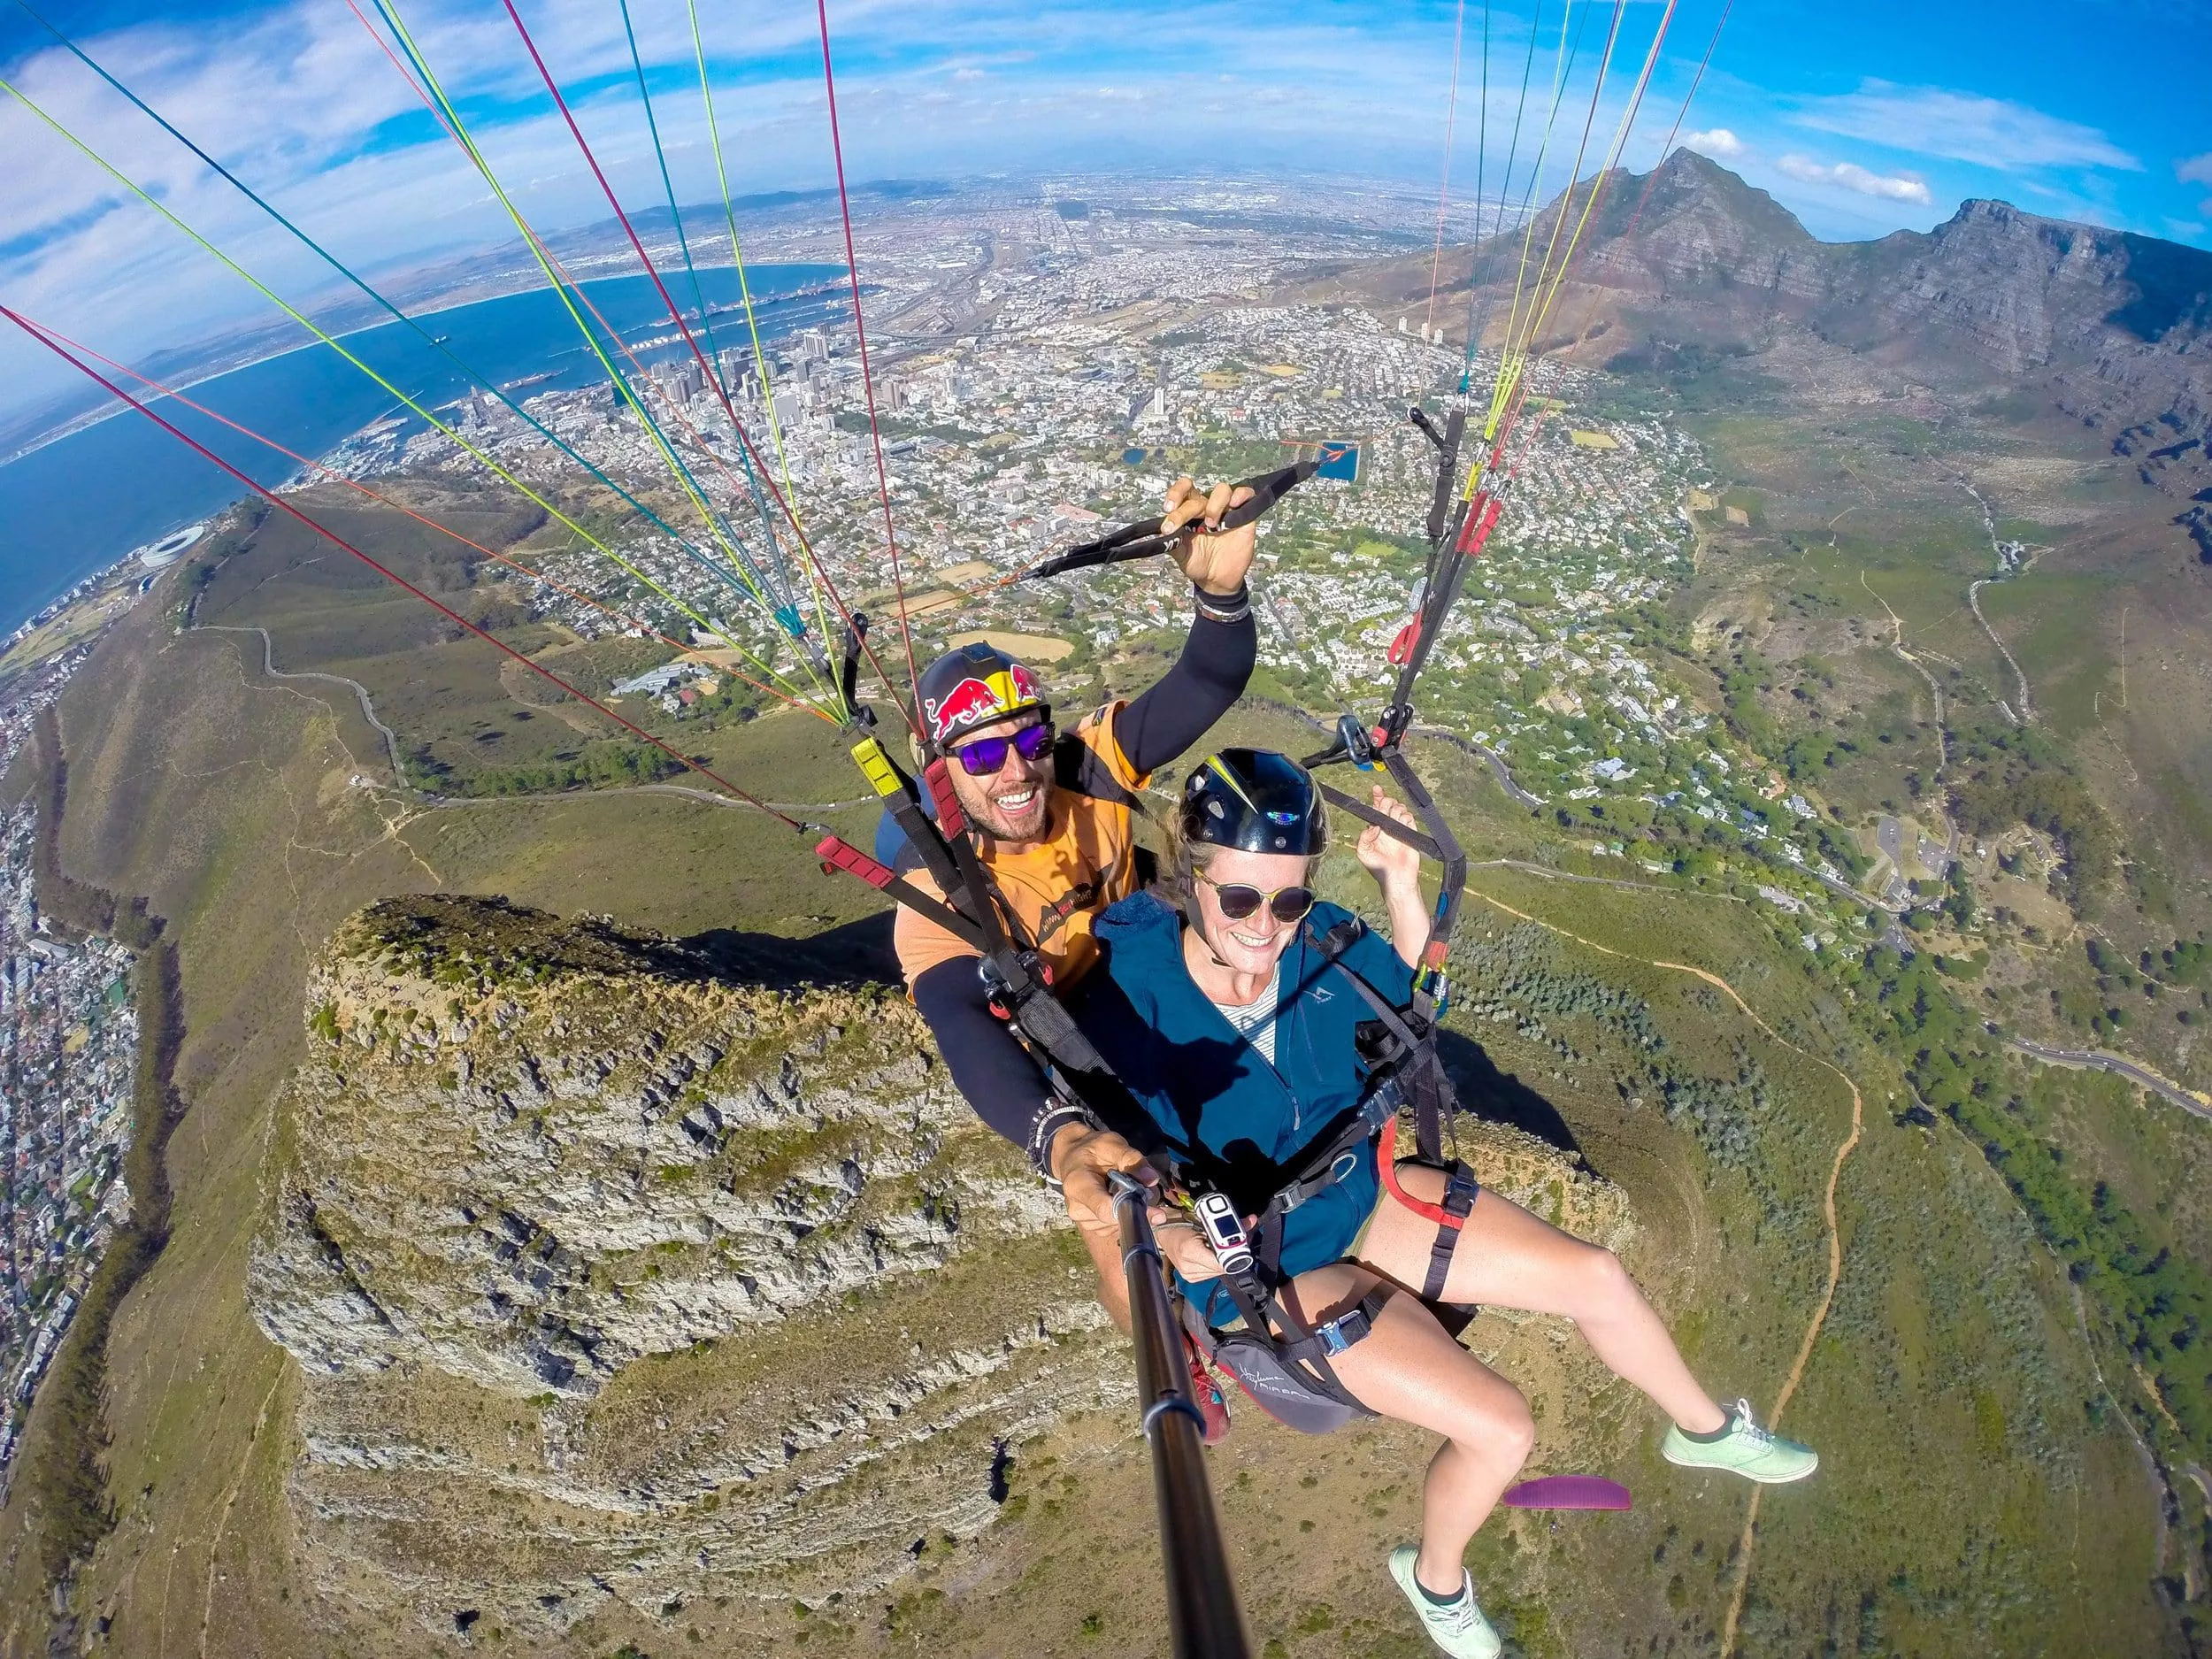 Parapax in South Africa, Africa | Paragliding - Rated 8.8